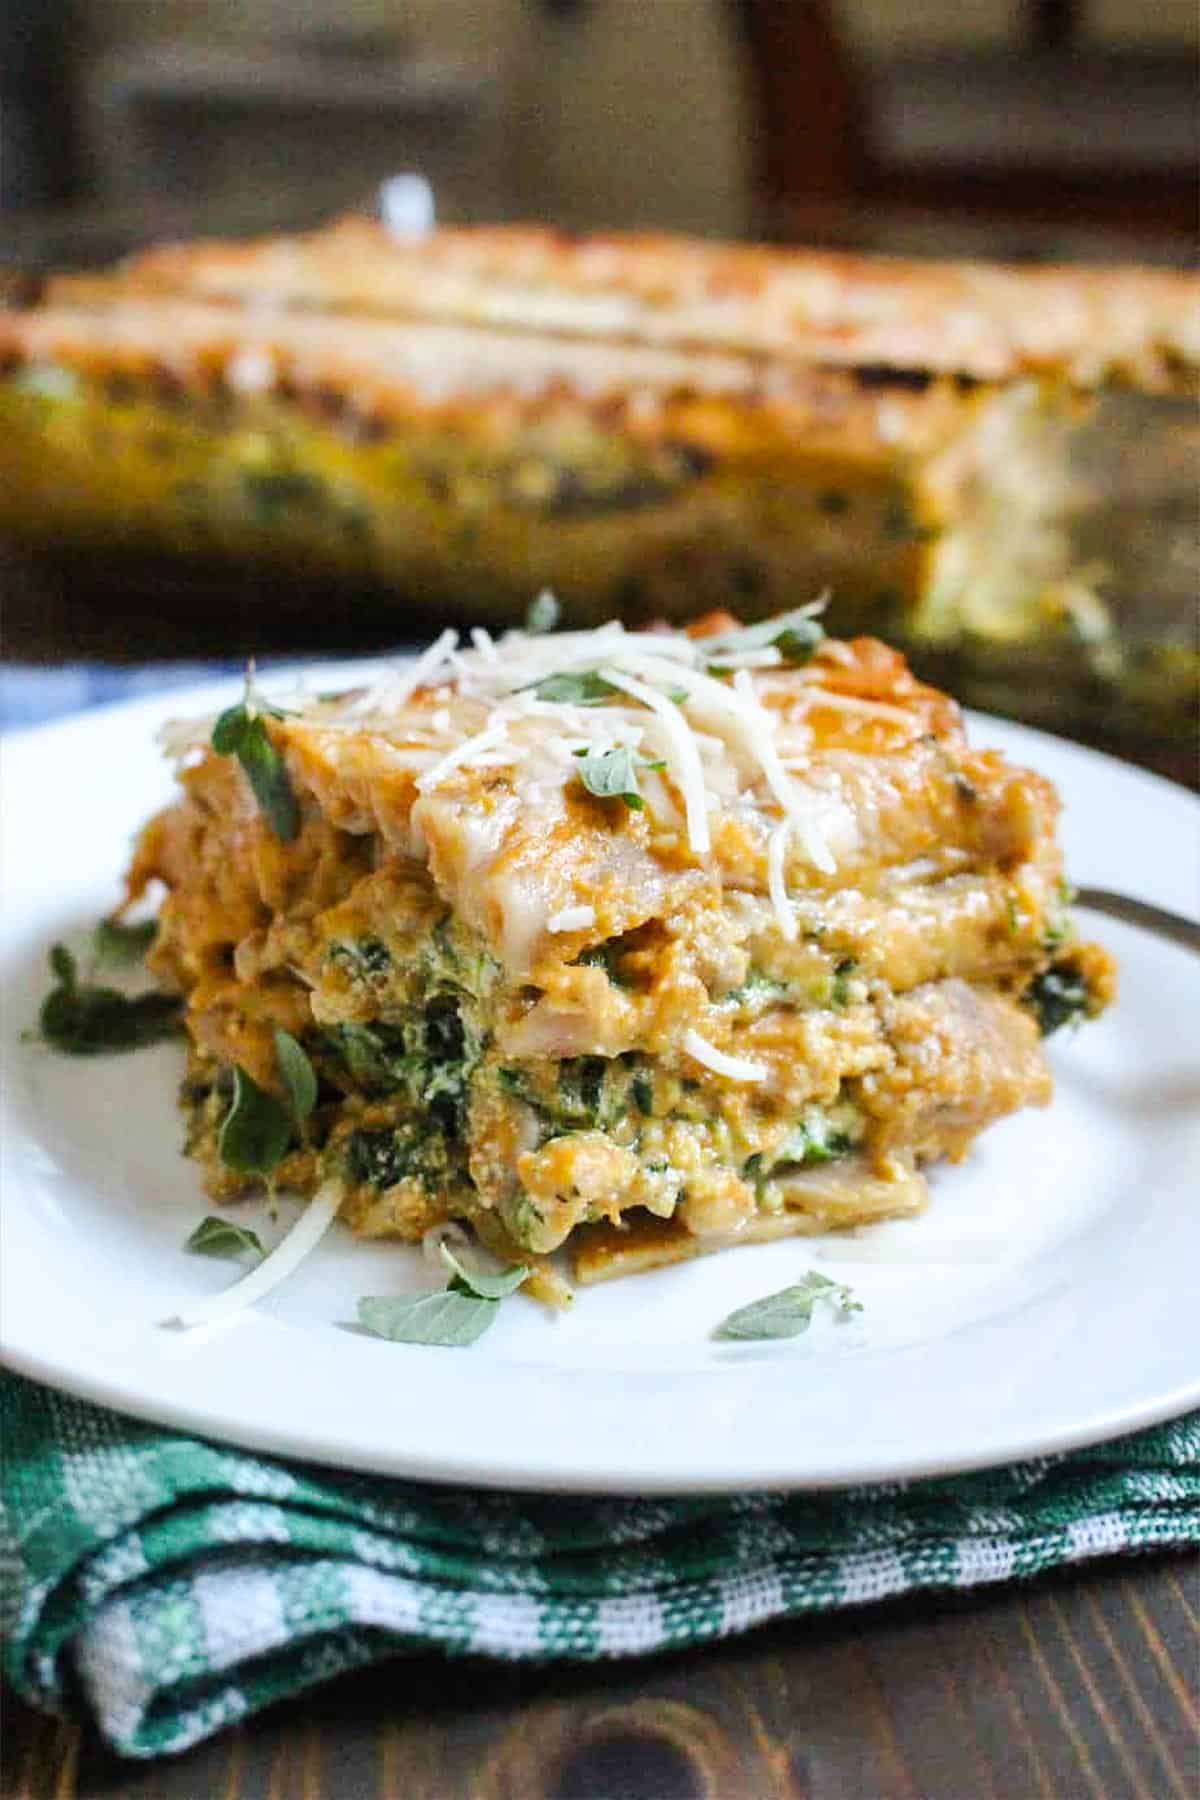 Pumpkin and spinach lasagna on a white plate.